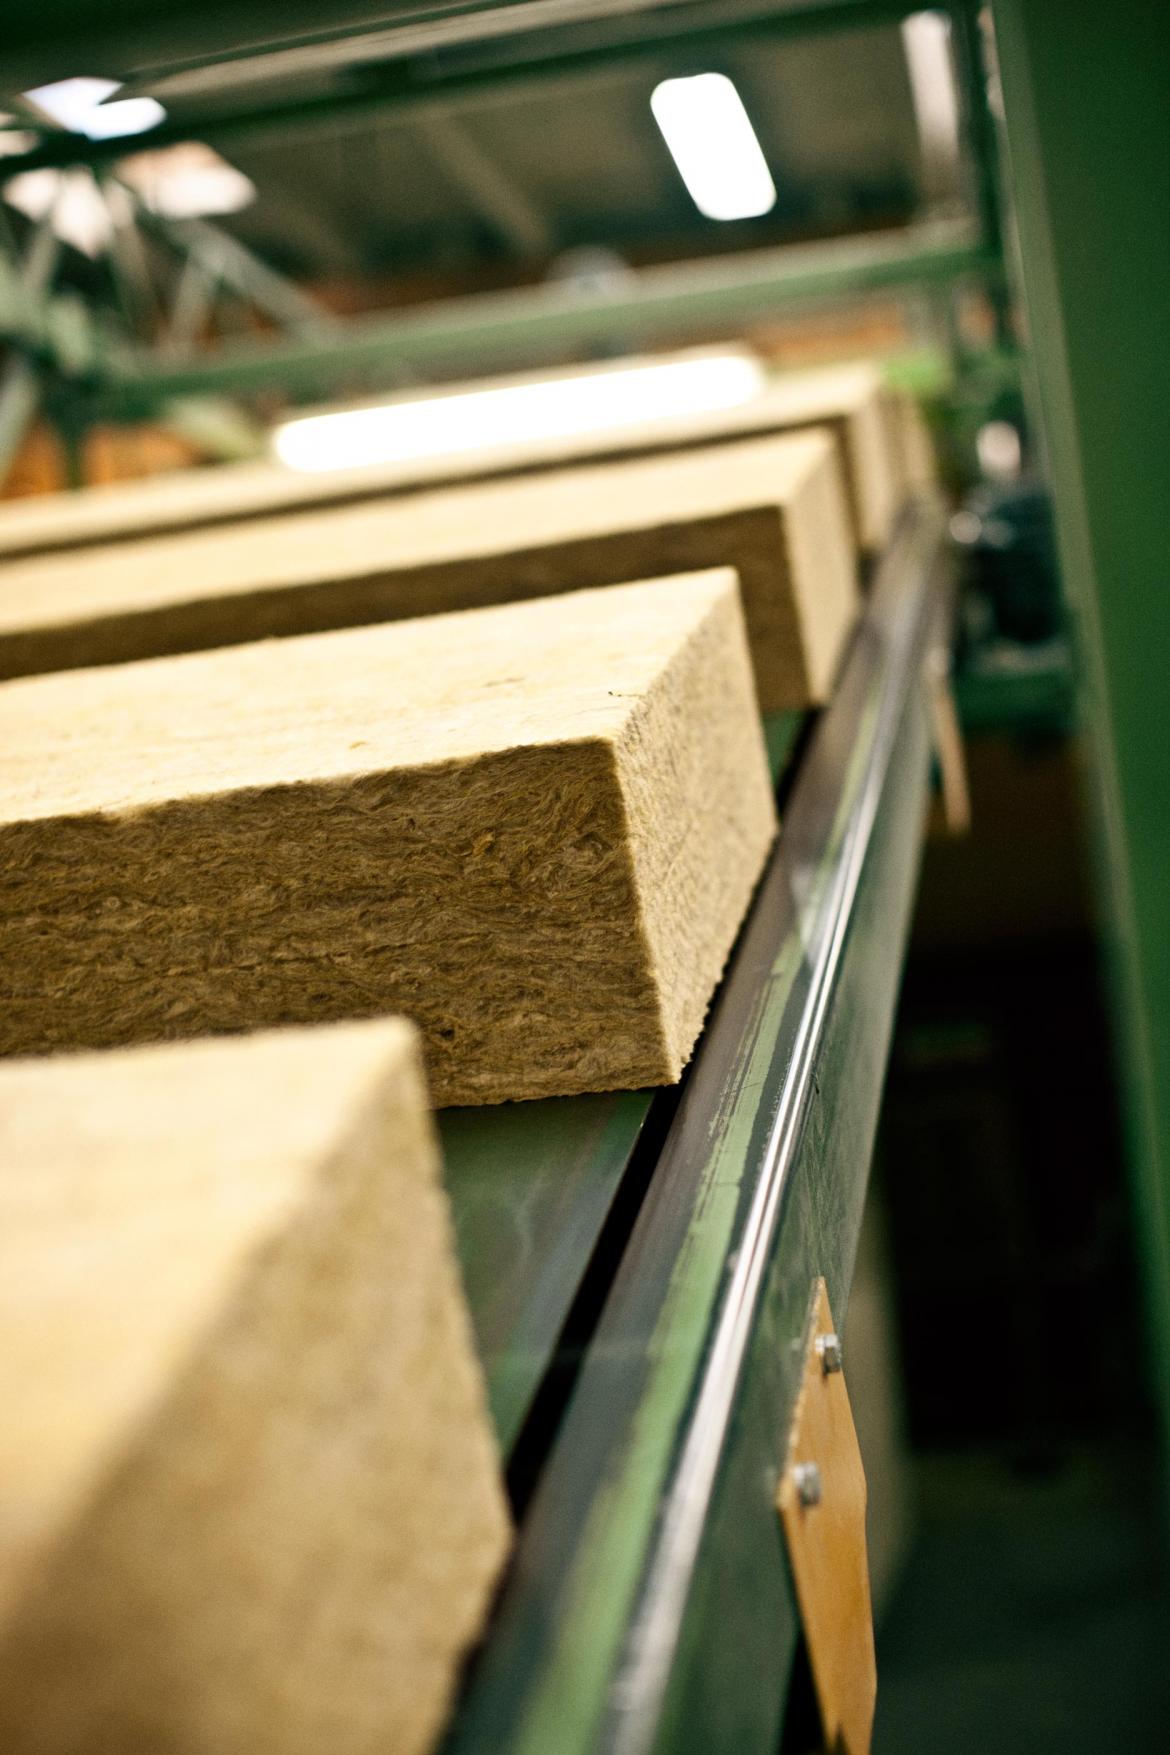 Stone wool insulation manufacturer Roxul has announced plans to construct a new production facility on a 130-acre site in Jefferson County, West Virginia.